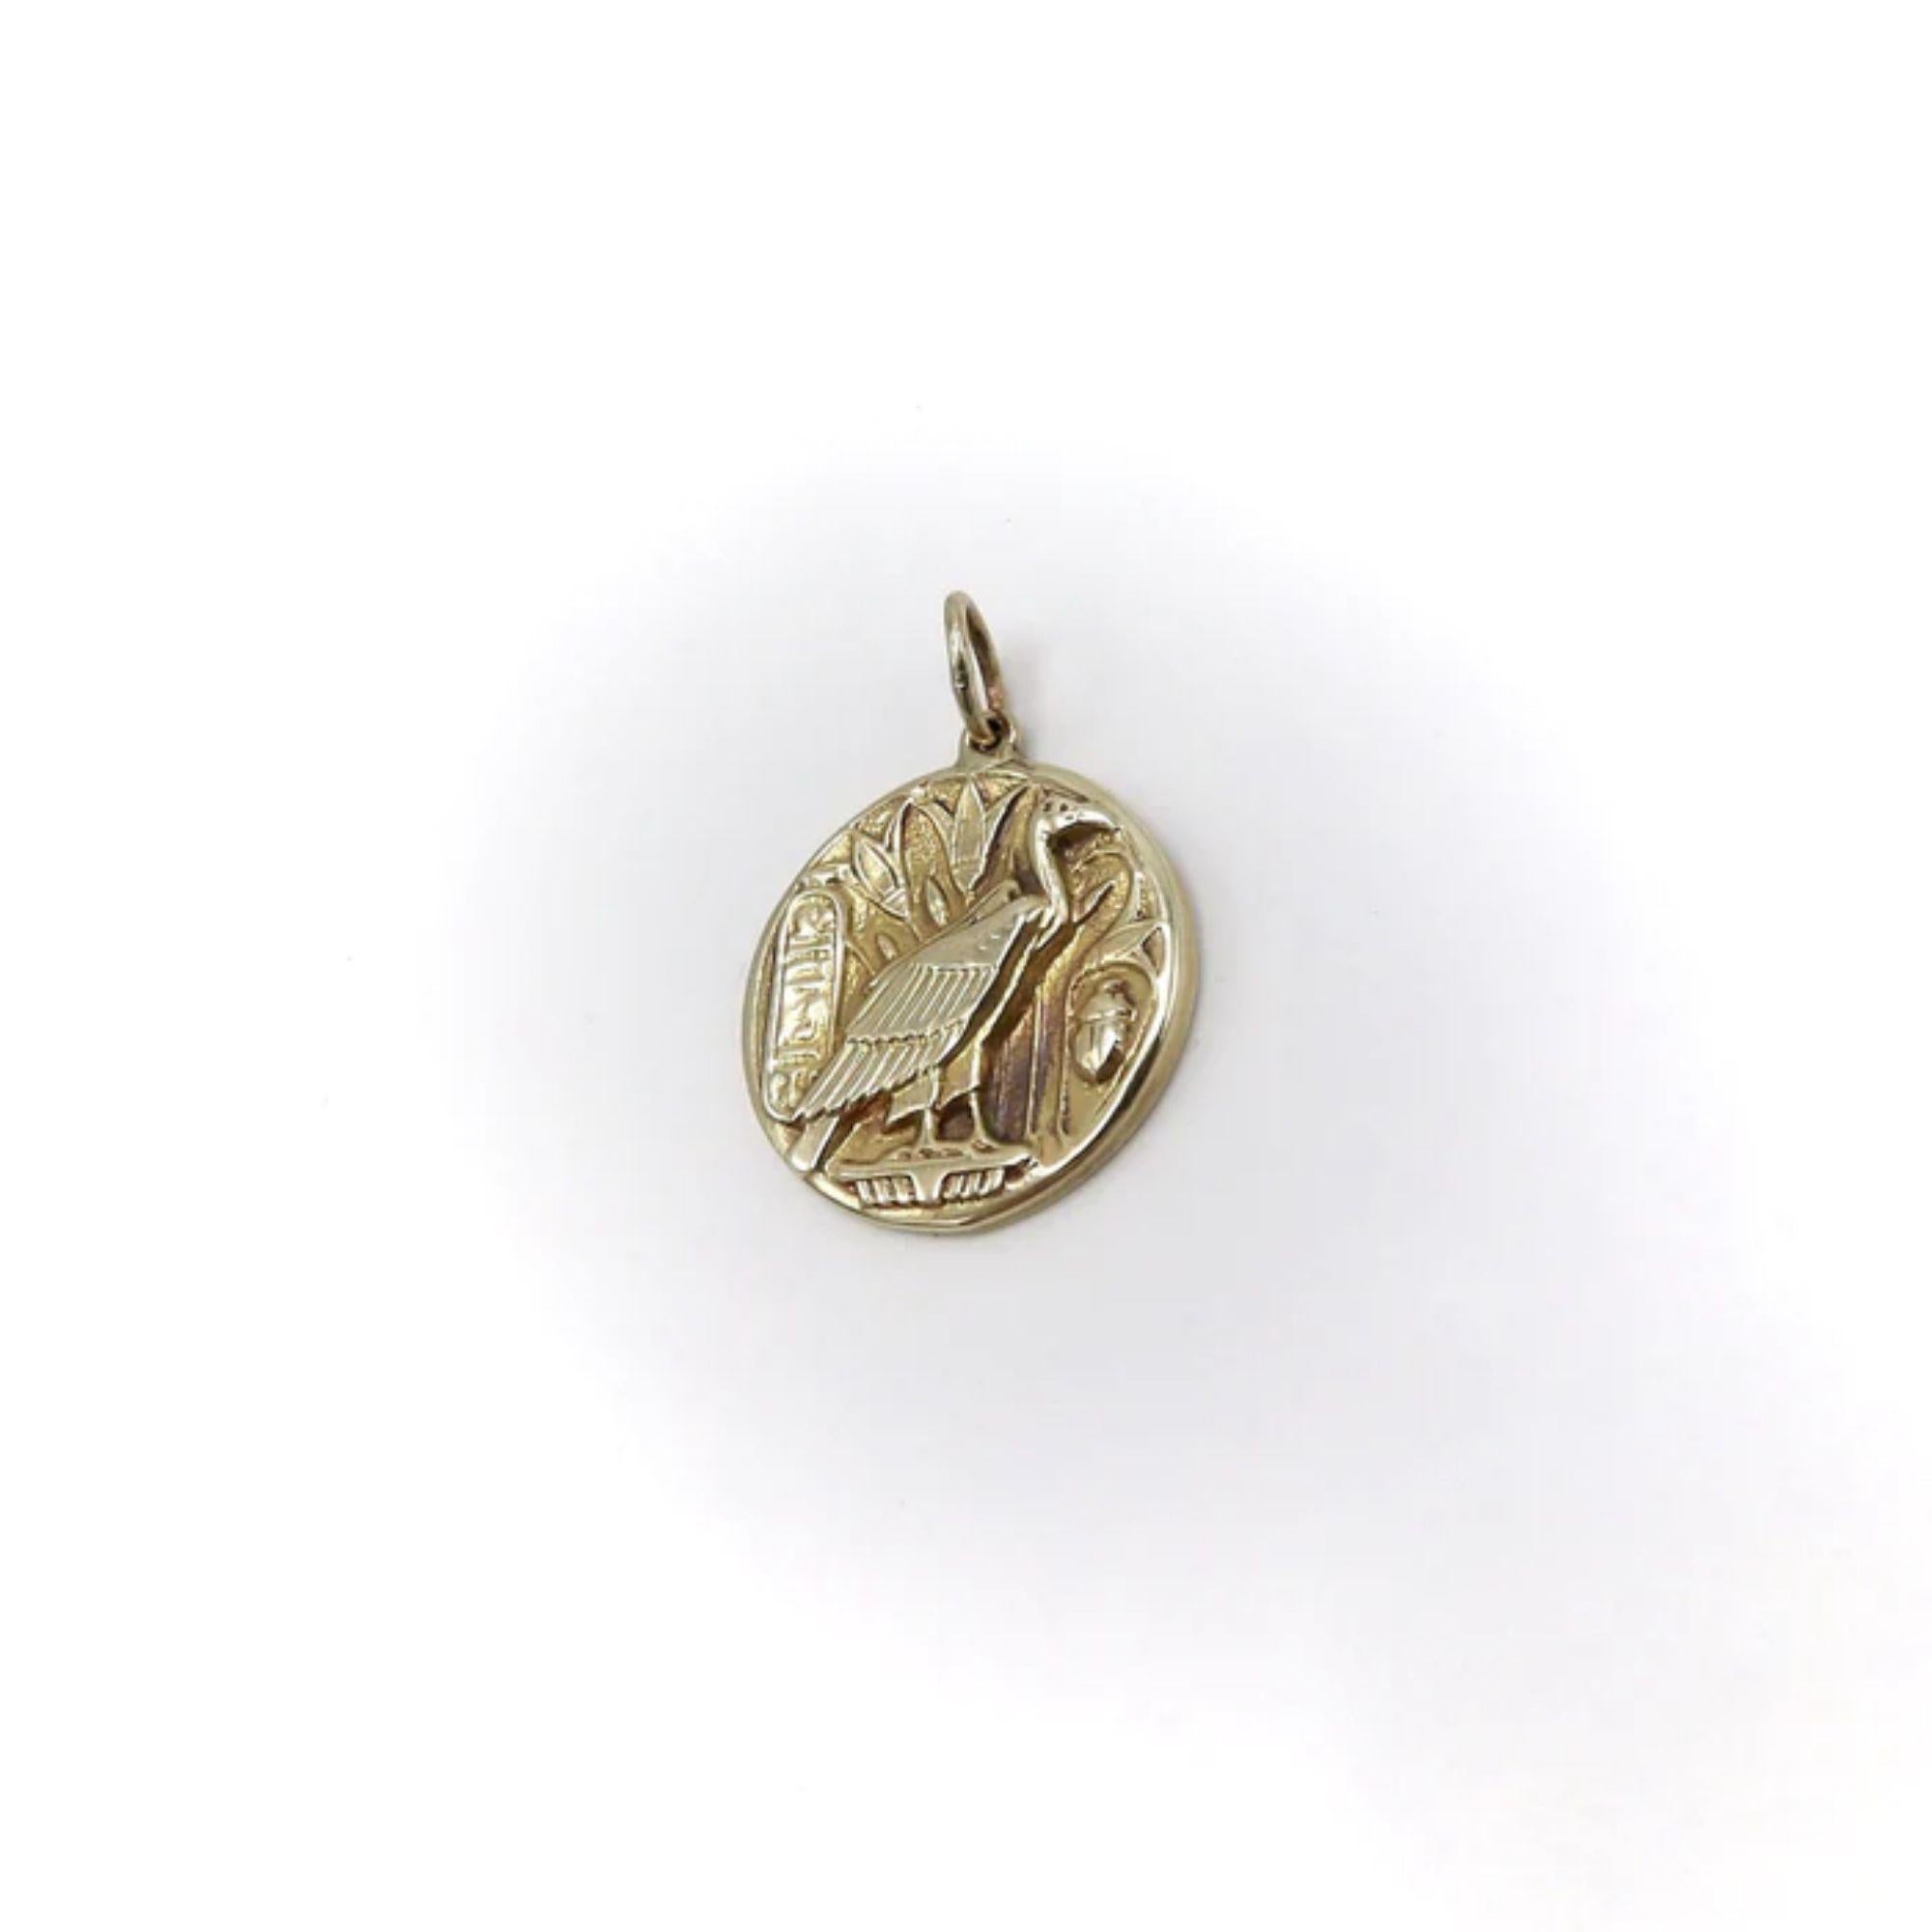 This 14k gold medallion charm is part of the Kirsten’s Corner signature “Cute as a Button” collection. It's handcrafted from a Victorian-era button and features the Egyptian vulture goddess Nekhbet.

Nekhbet is the protector of Upper Egypt and its